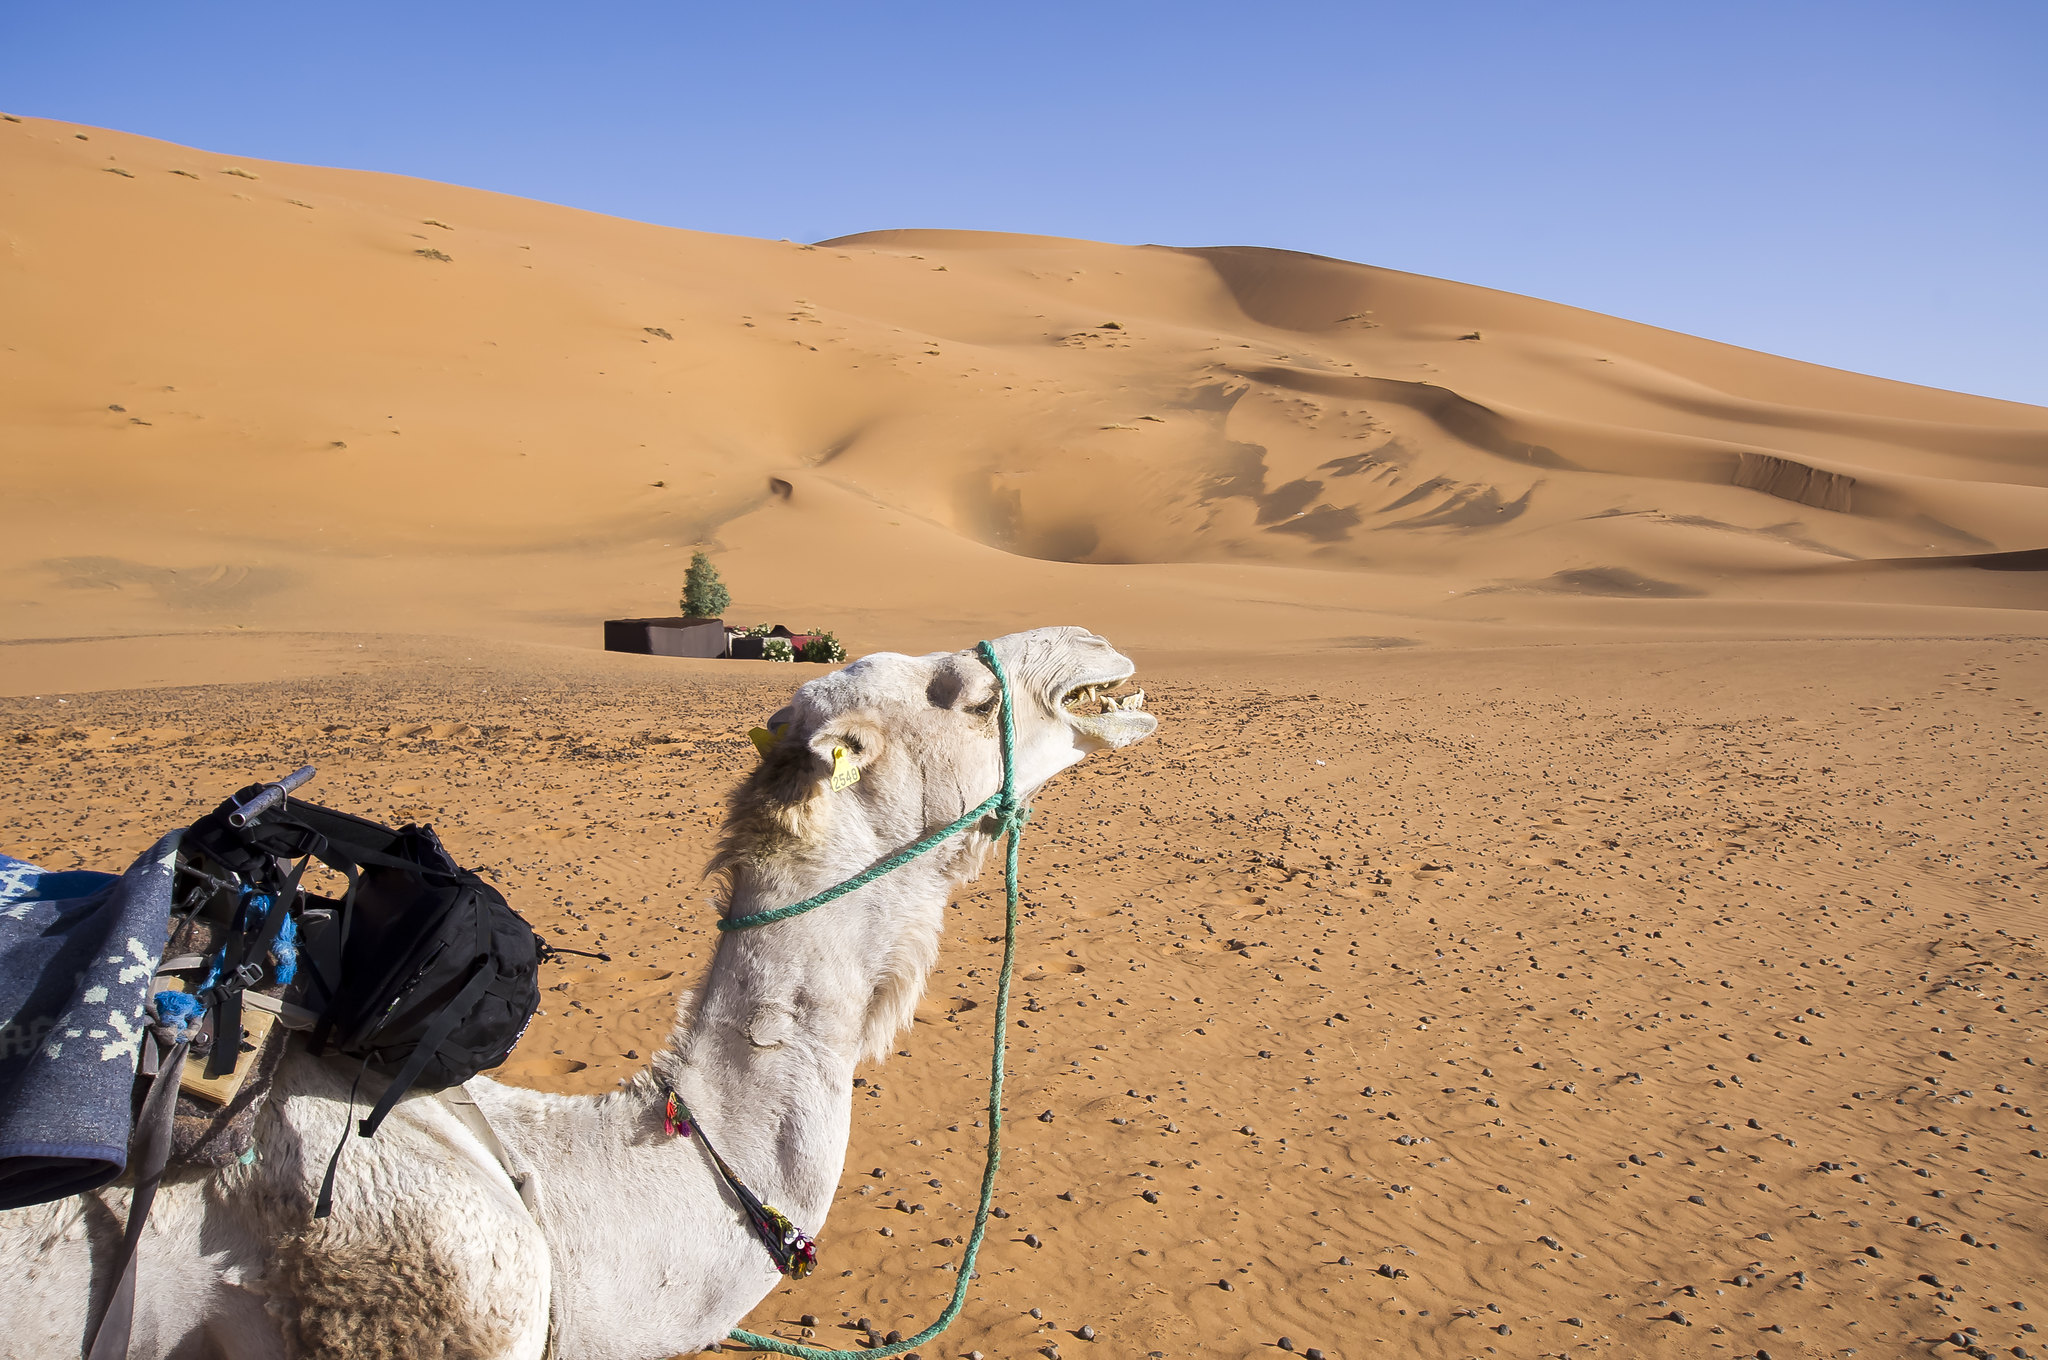 Getting to Merzouga desert and trying camel ride